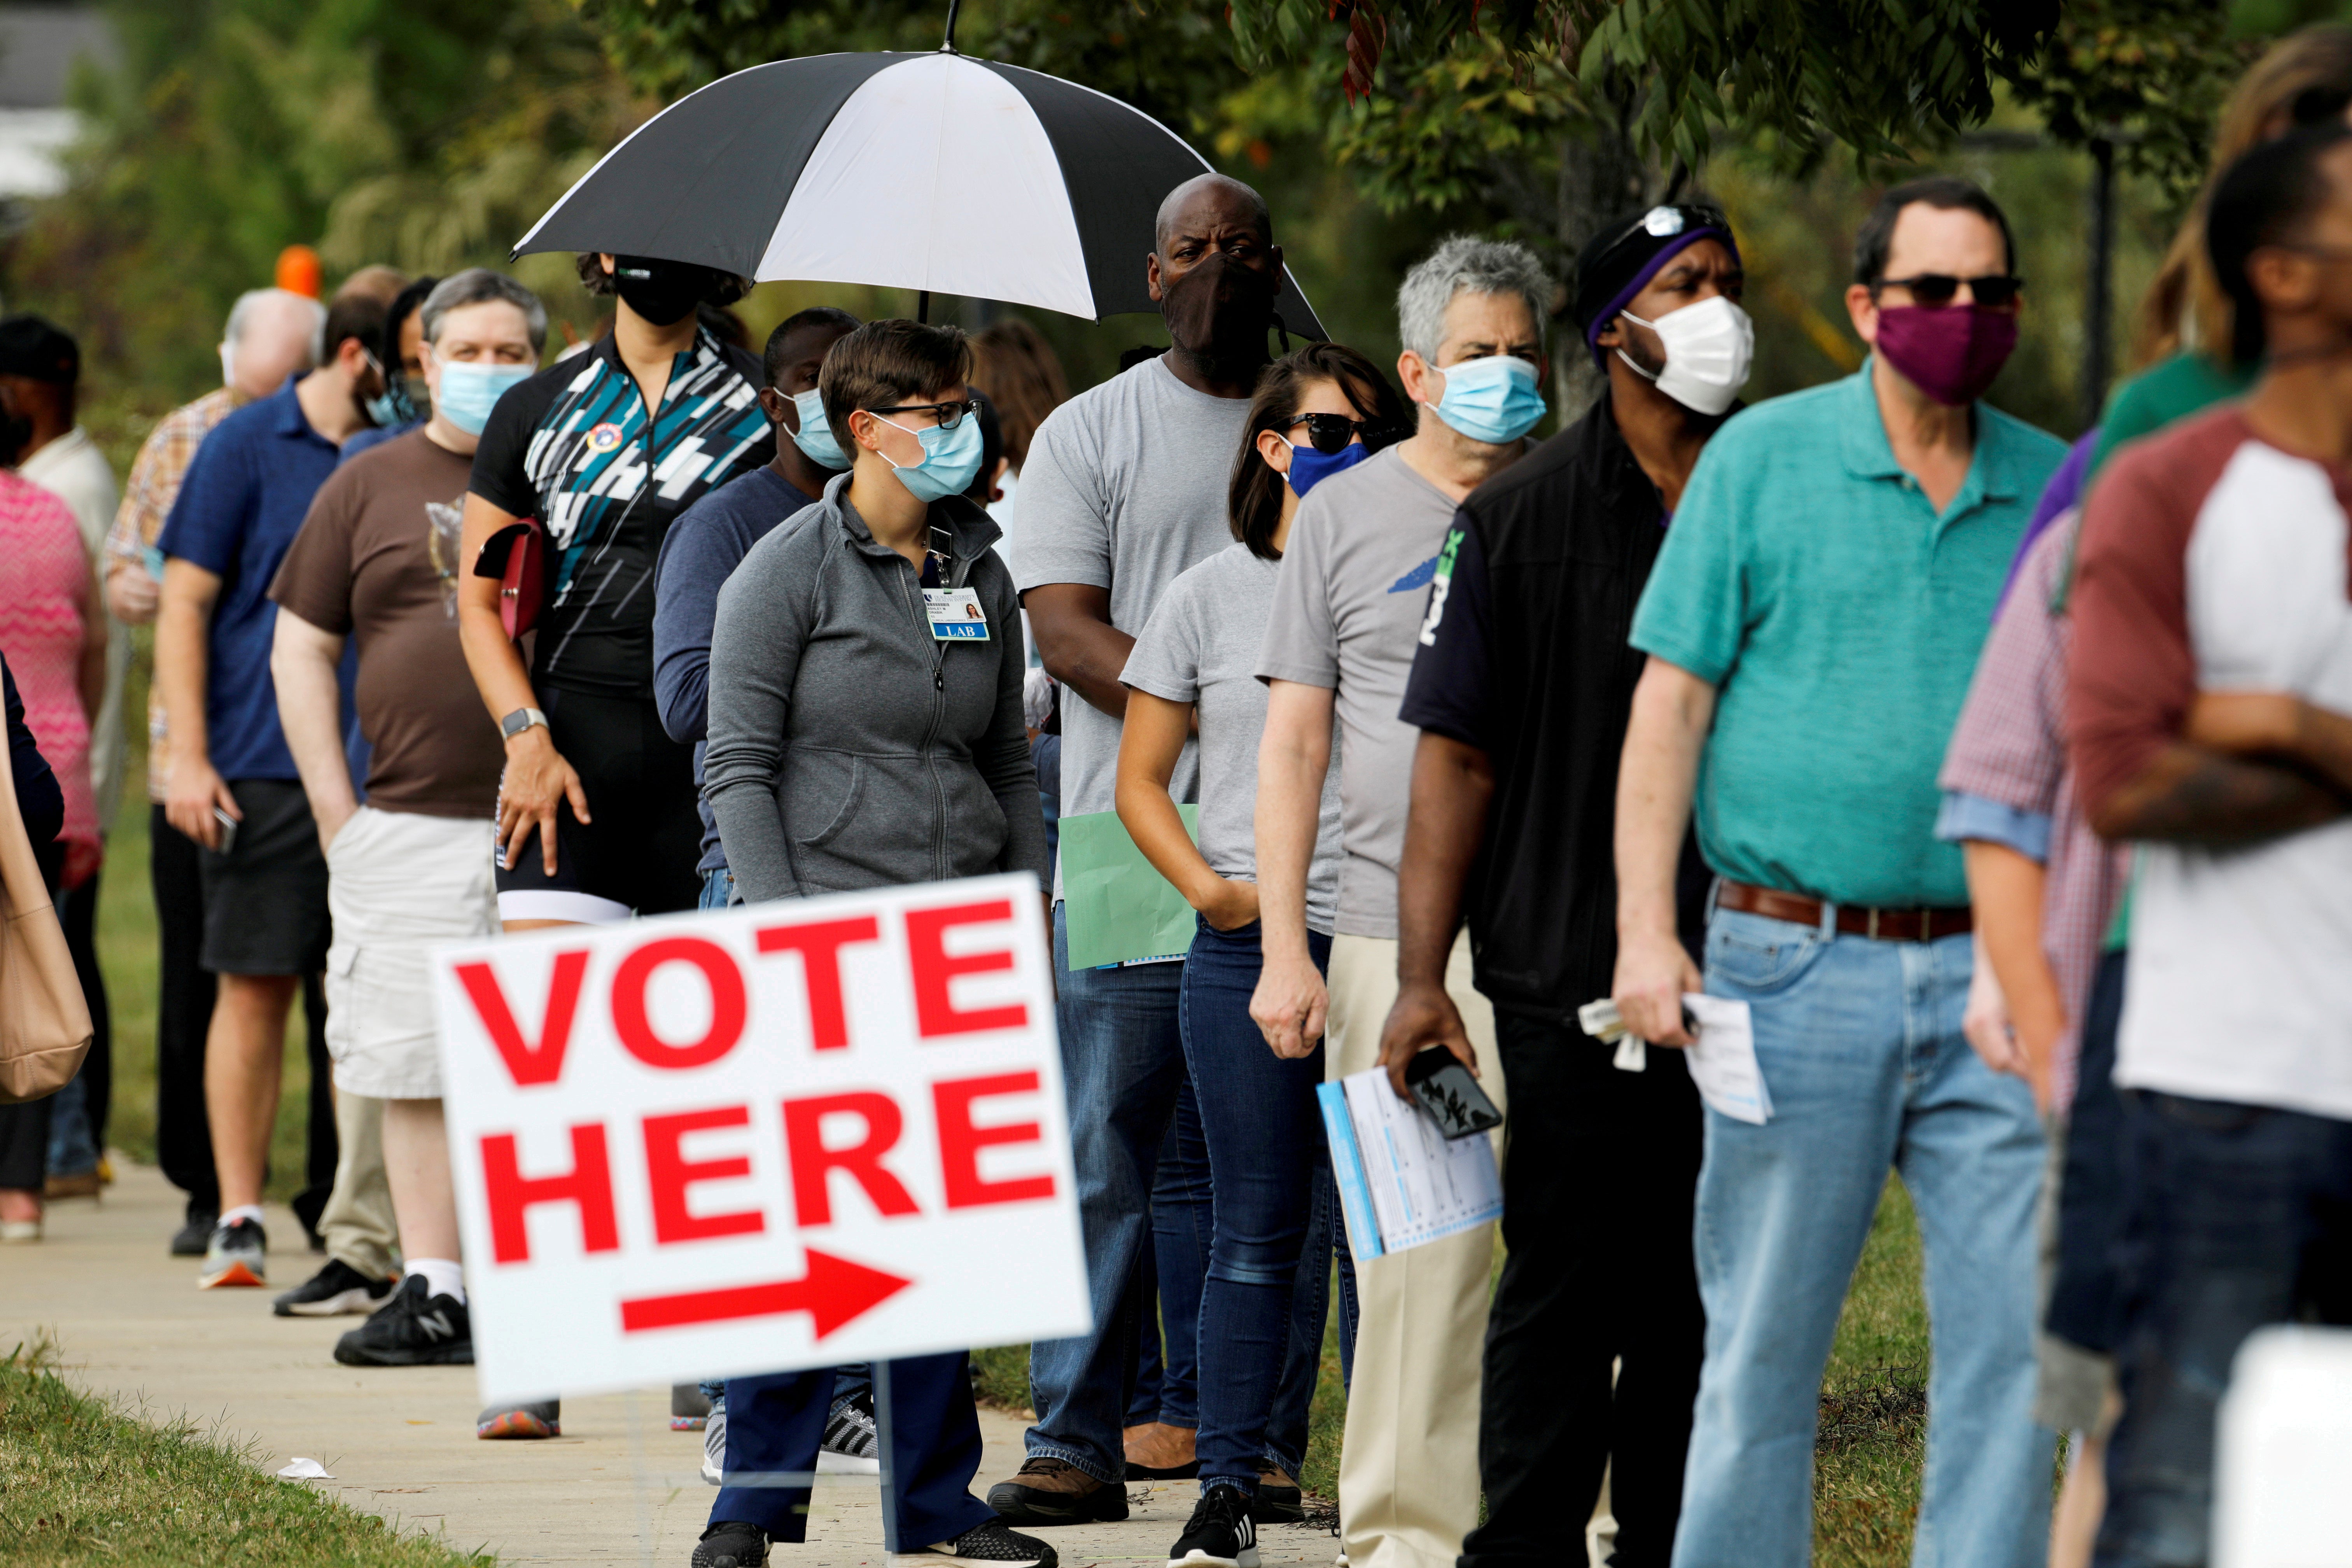 File photo: U.S. voters queue to cast their ballots in North Carolina in last year’s elections